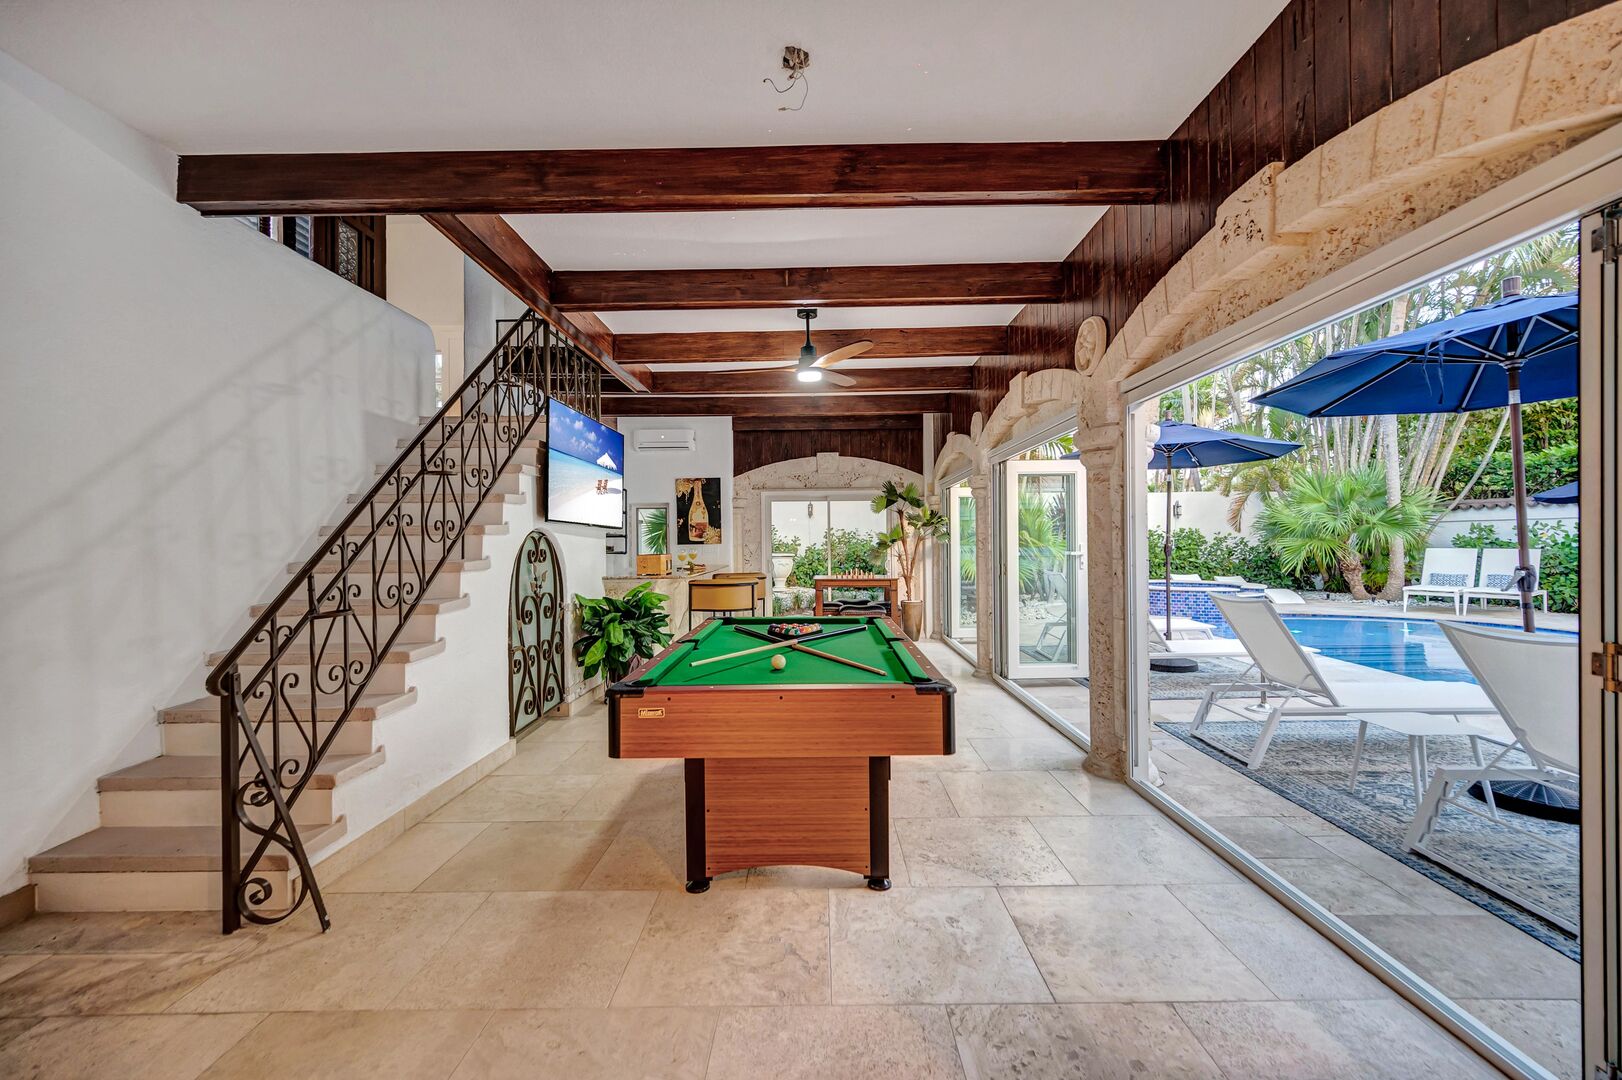 The covered patio, featuring a bar area with a pool table, provides seamless access to the heated pool and bedroom six on the second floor